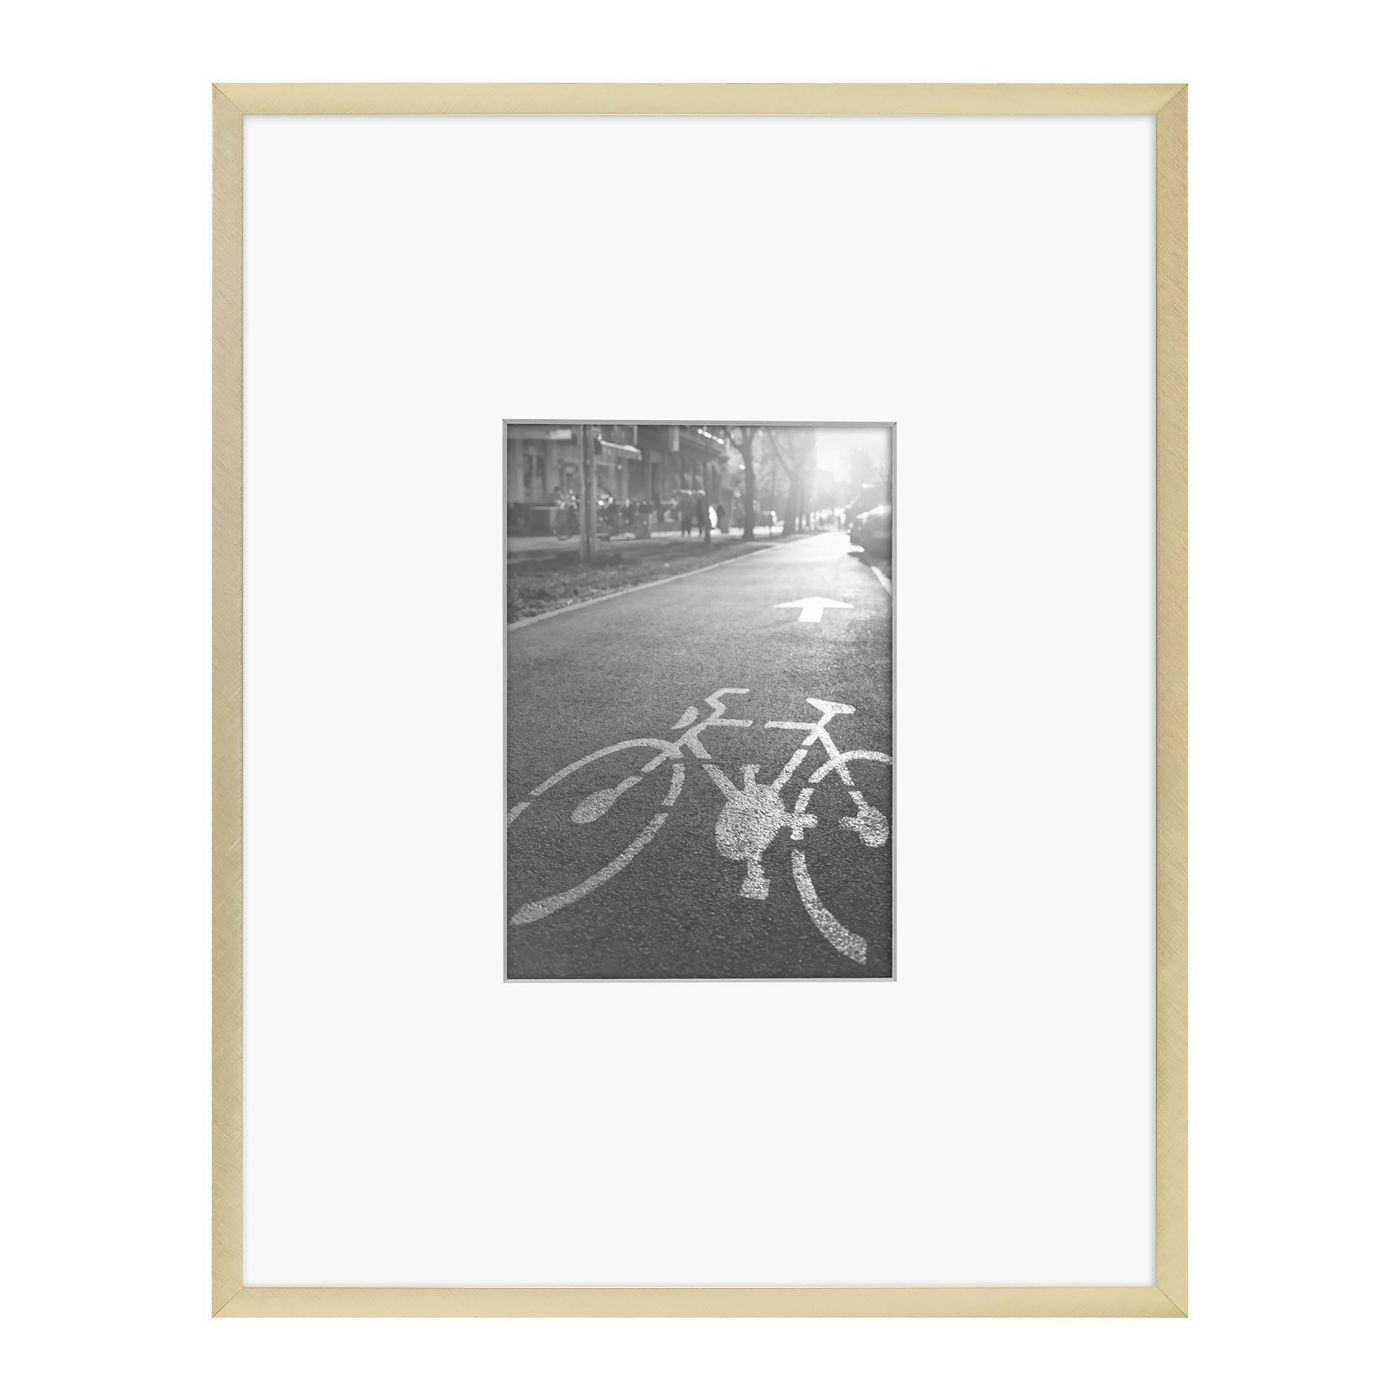 thin matted gold photo frame with black and white photo inside